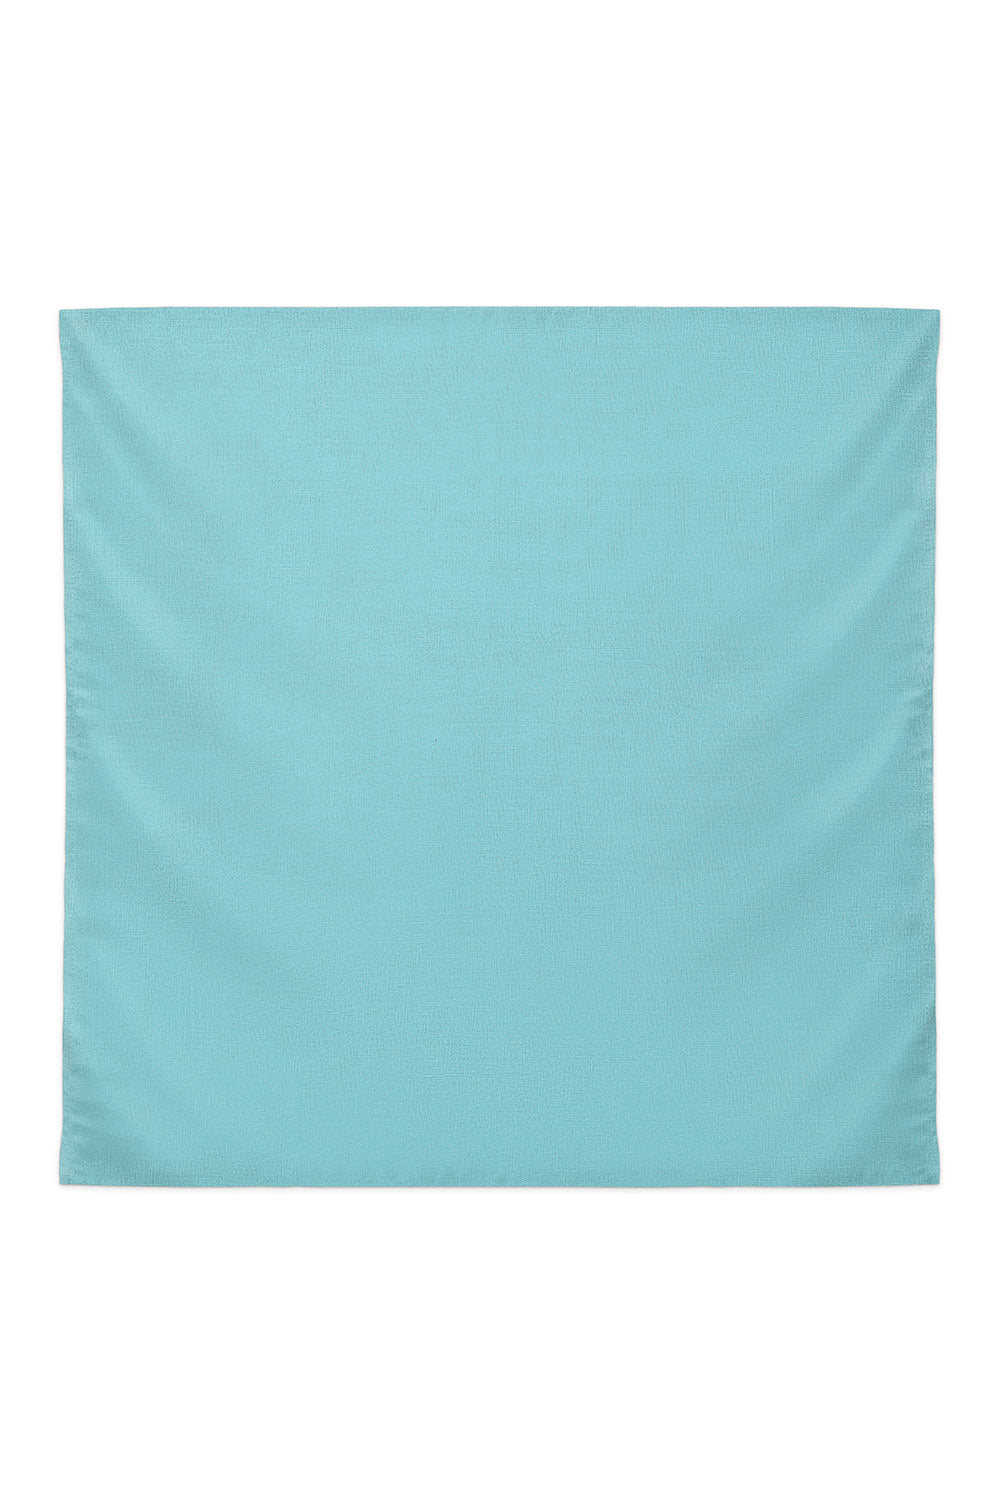 RR Basic Cotton Scarf in Turquoise